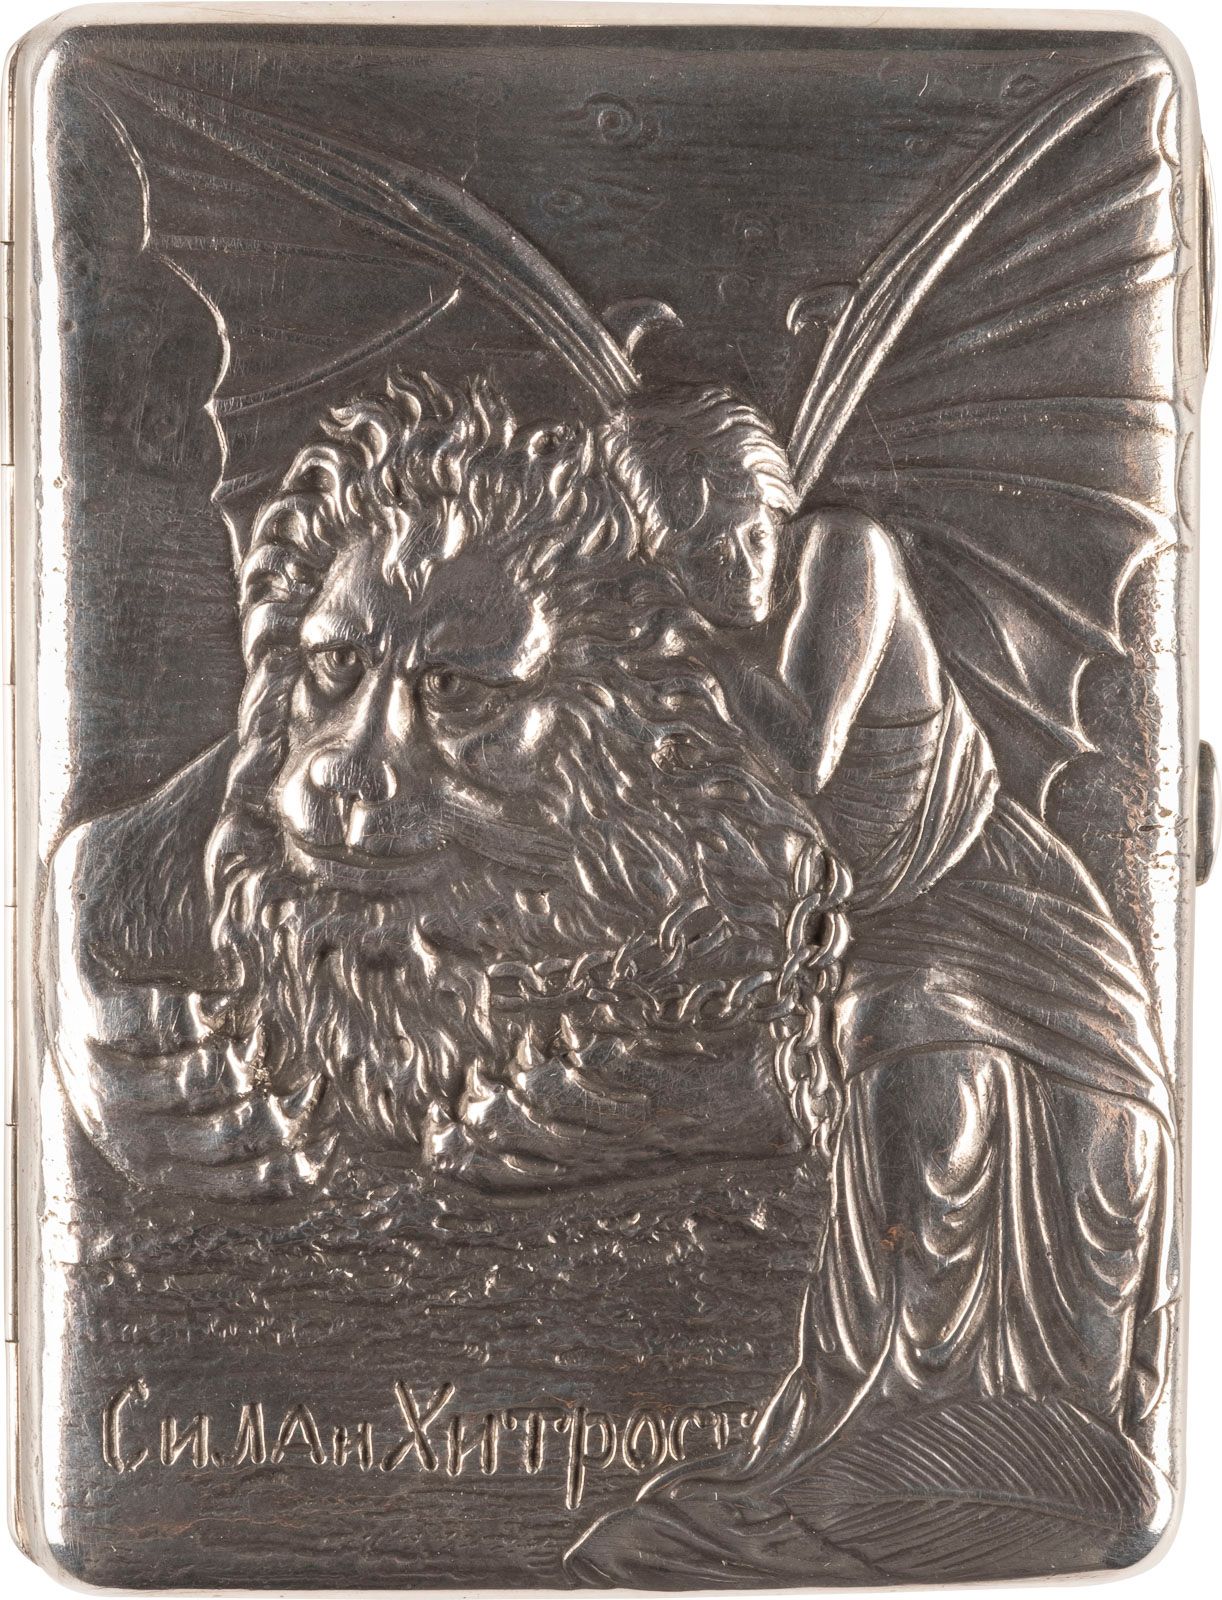 A SILVER CIGARETTE CASE 'STRENGTH AND CUNNING' 银质雪茄盒 "STRENGTH AND CUNNING" 俄罗斯，&hellip;